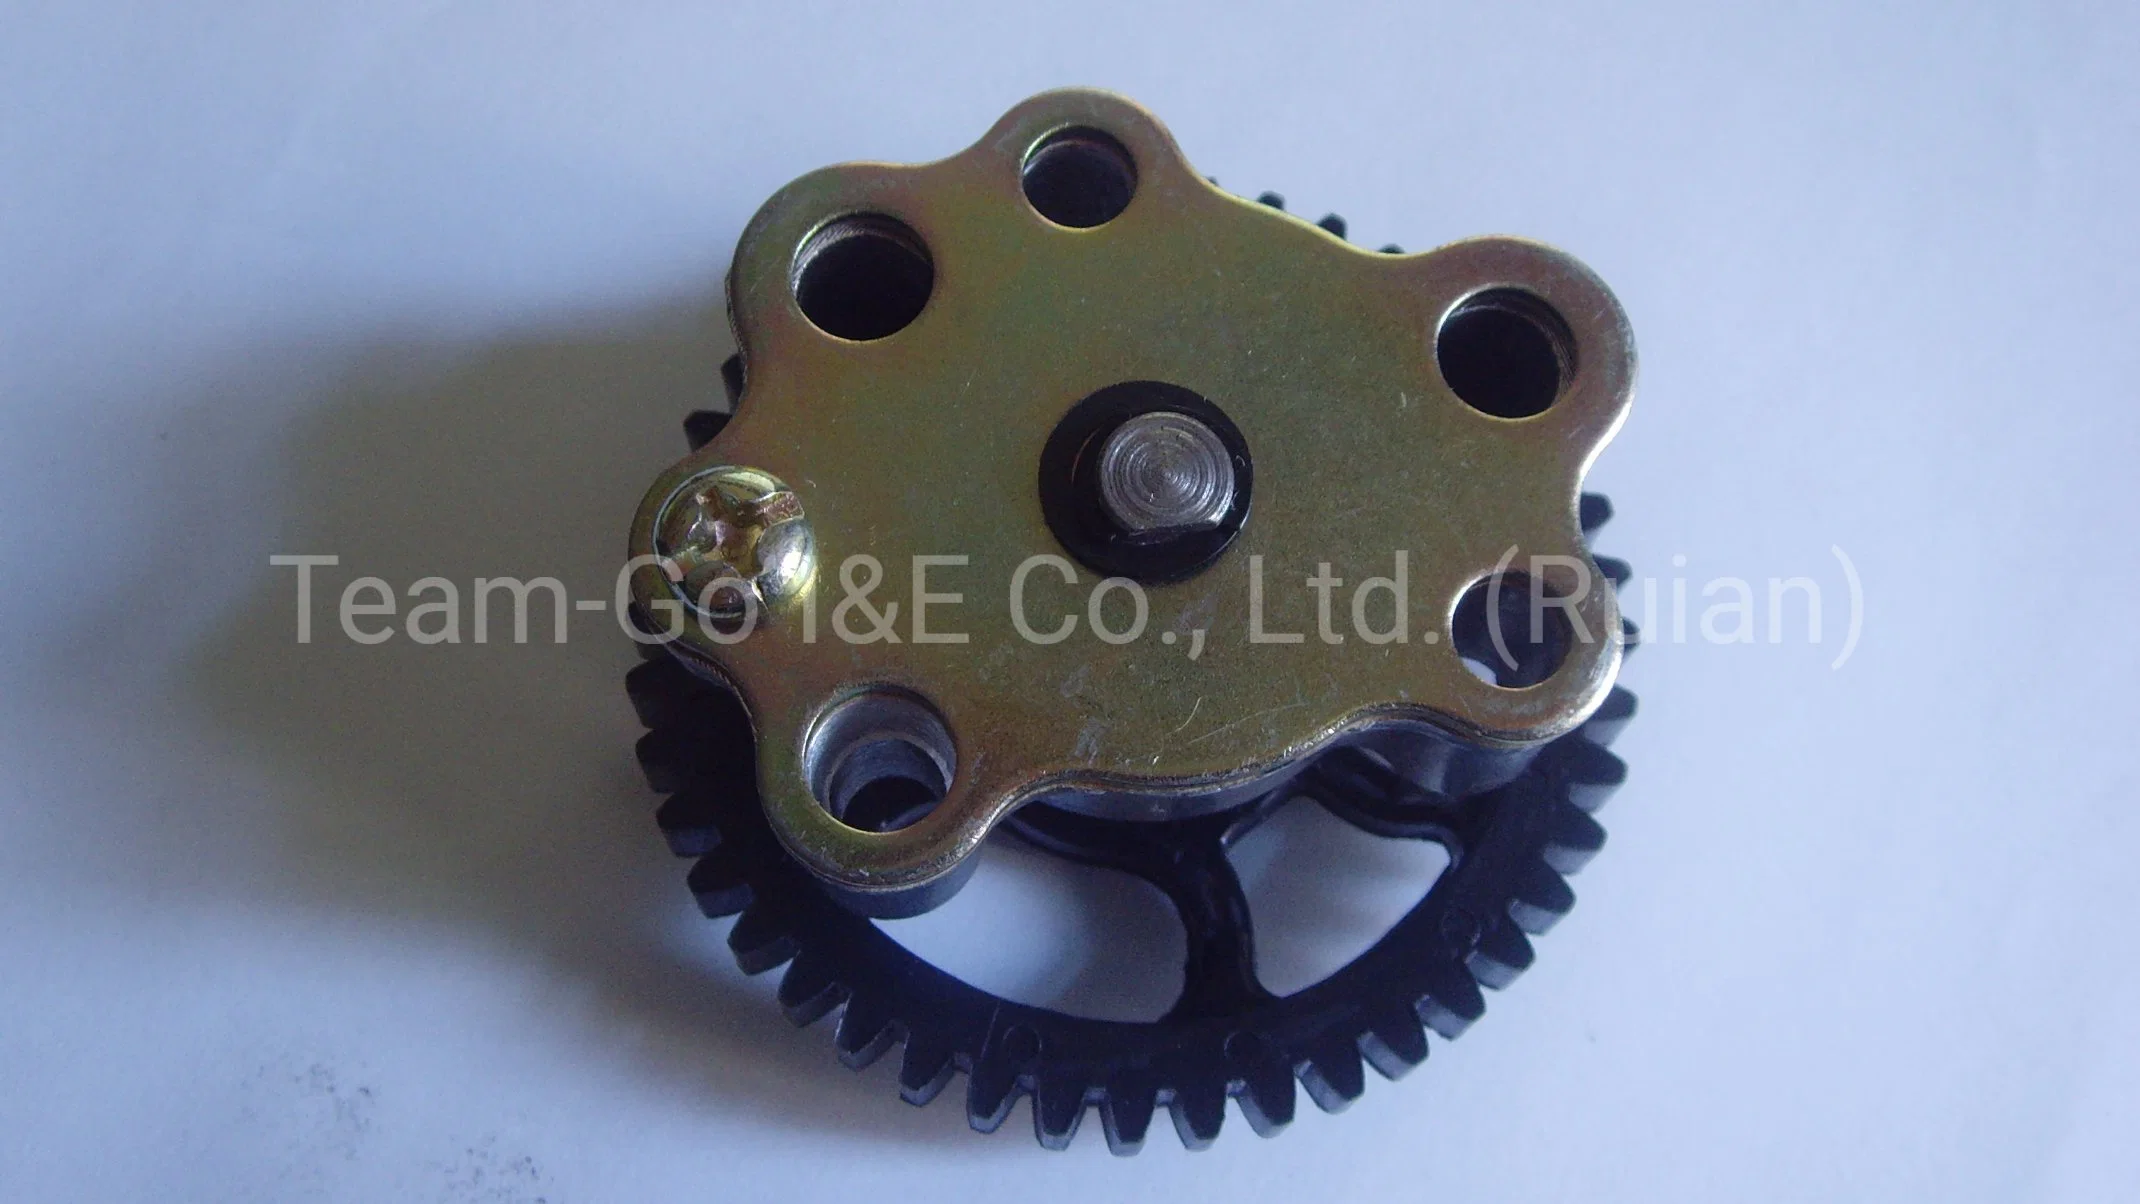 Tricycle Spare Part Oil Pump Baj205/Re45 with Competitive Prices and a Class Quality